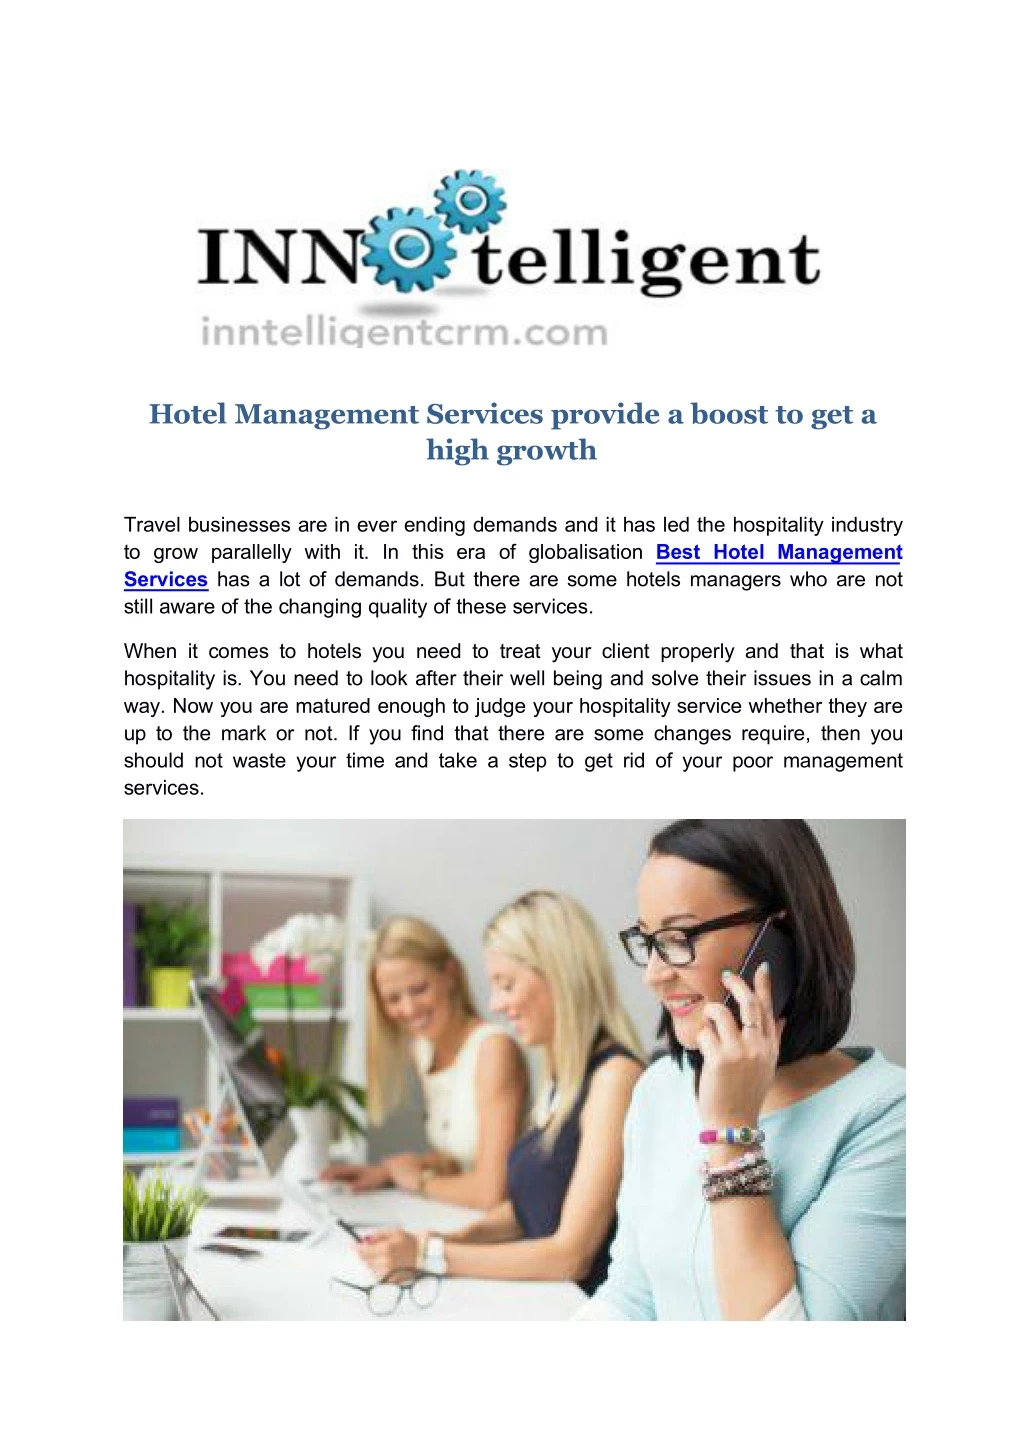 hotel management services provide a boost